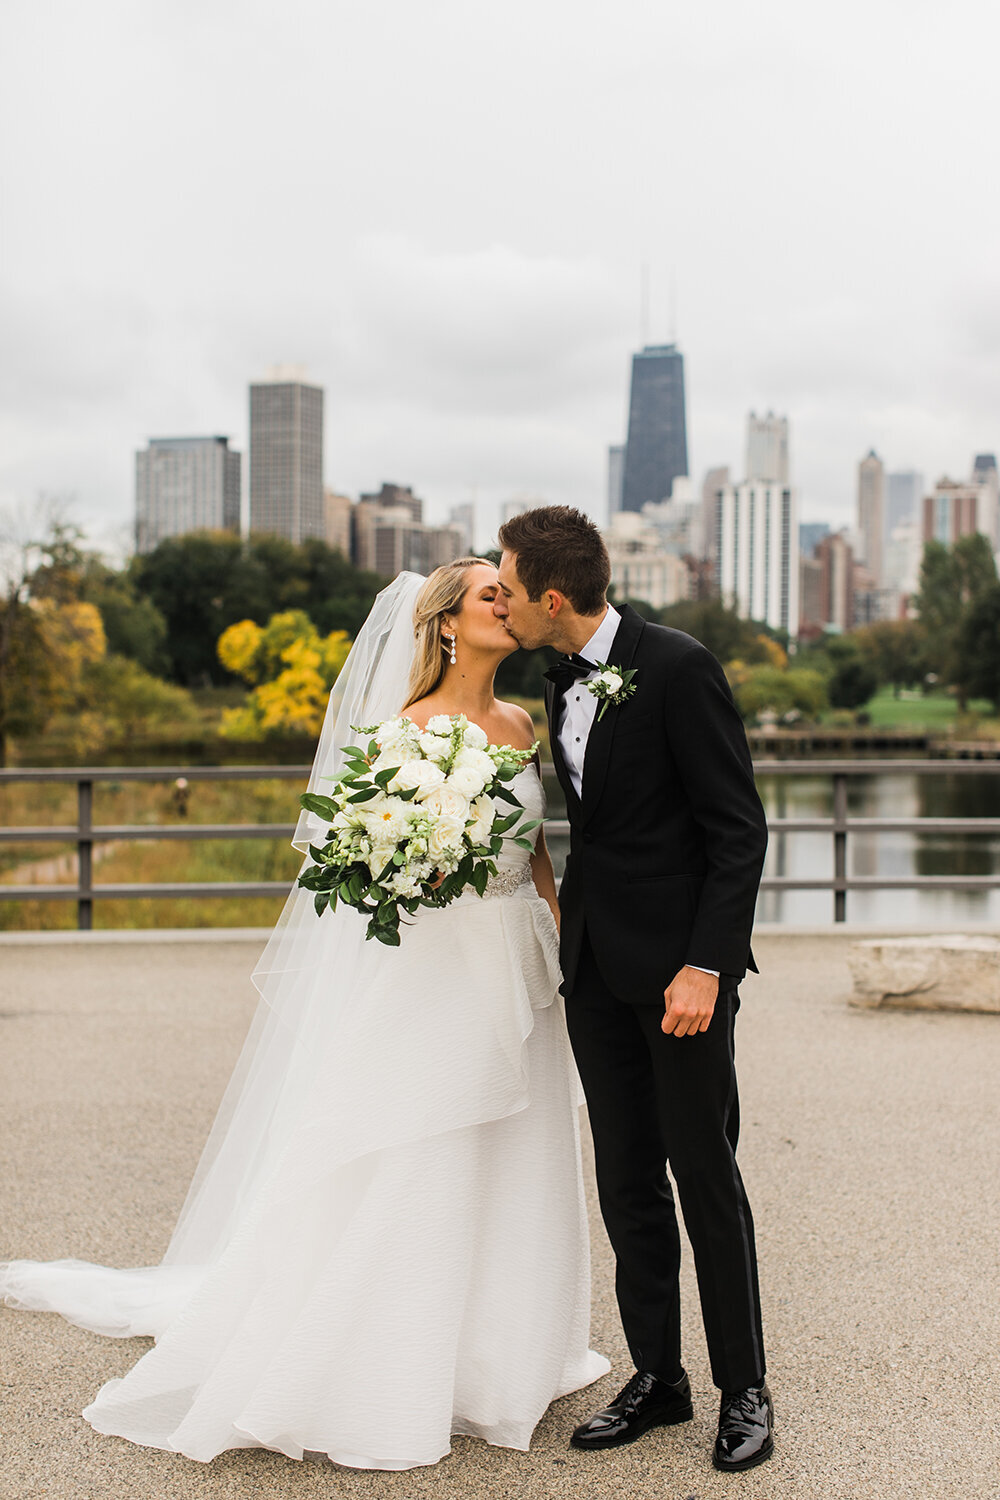 A bride and groom share a kiss with the Chicago skyline in the backdrop